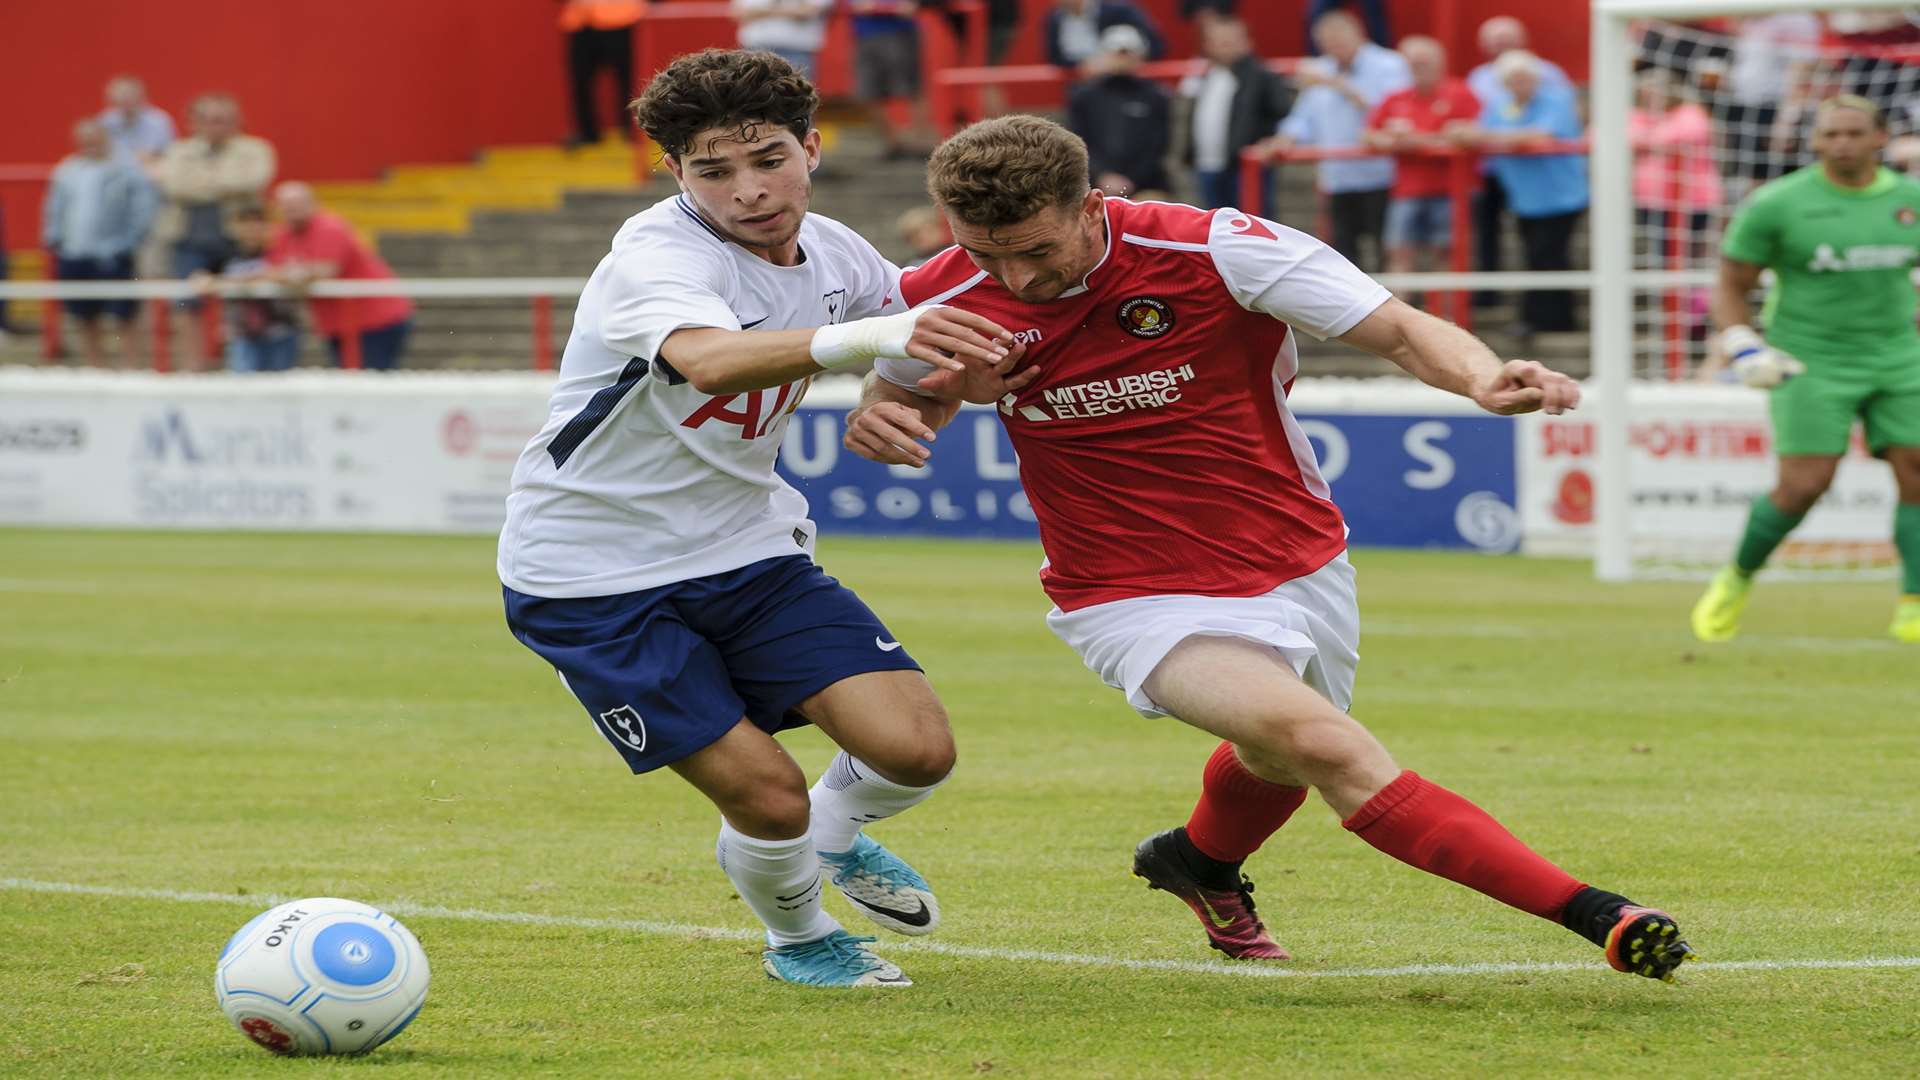 Jack Connors battles for possession against Tottenham Picture: Andy Payton